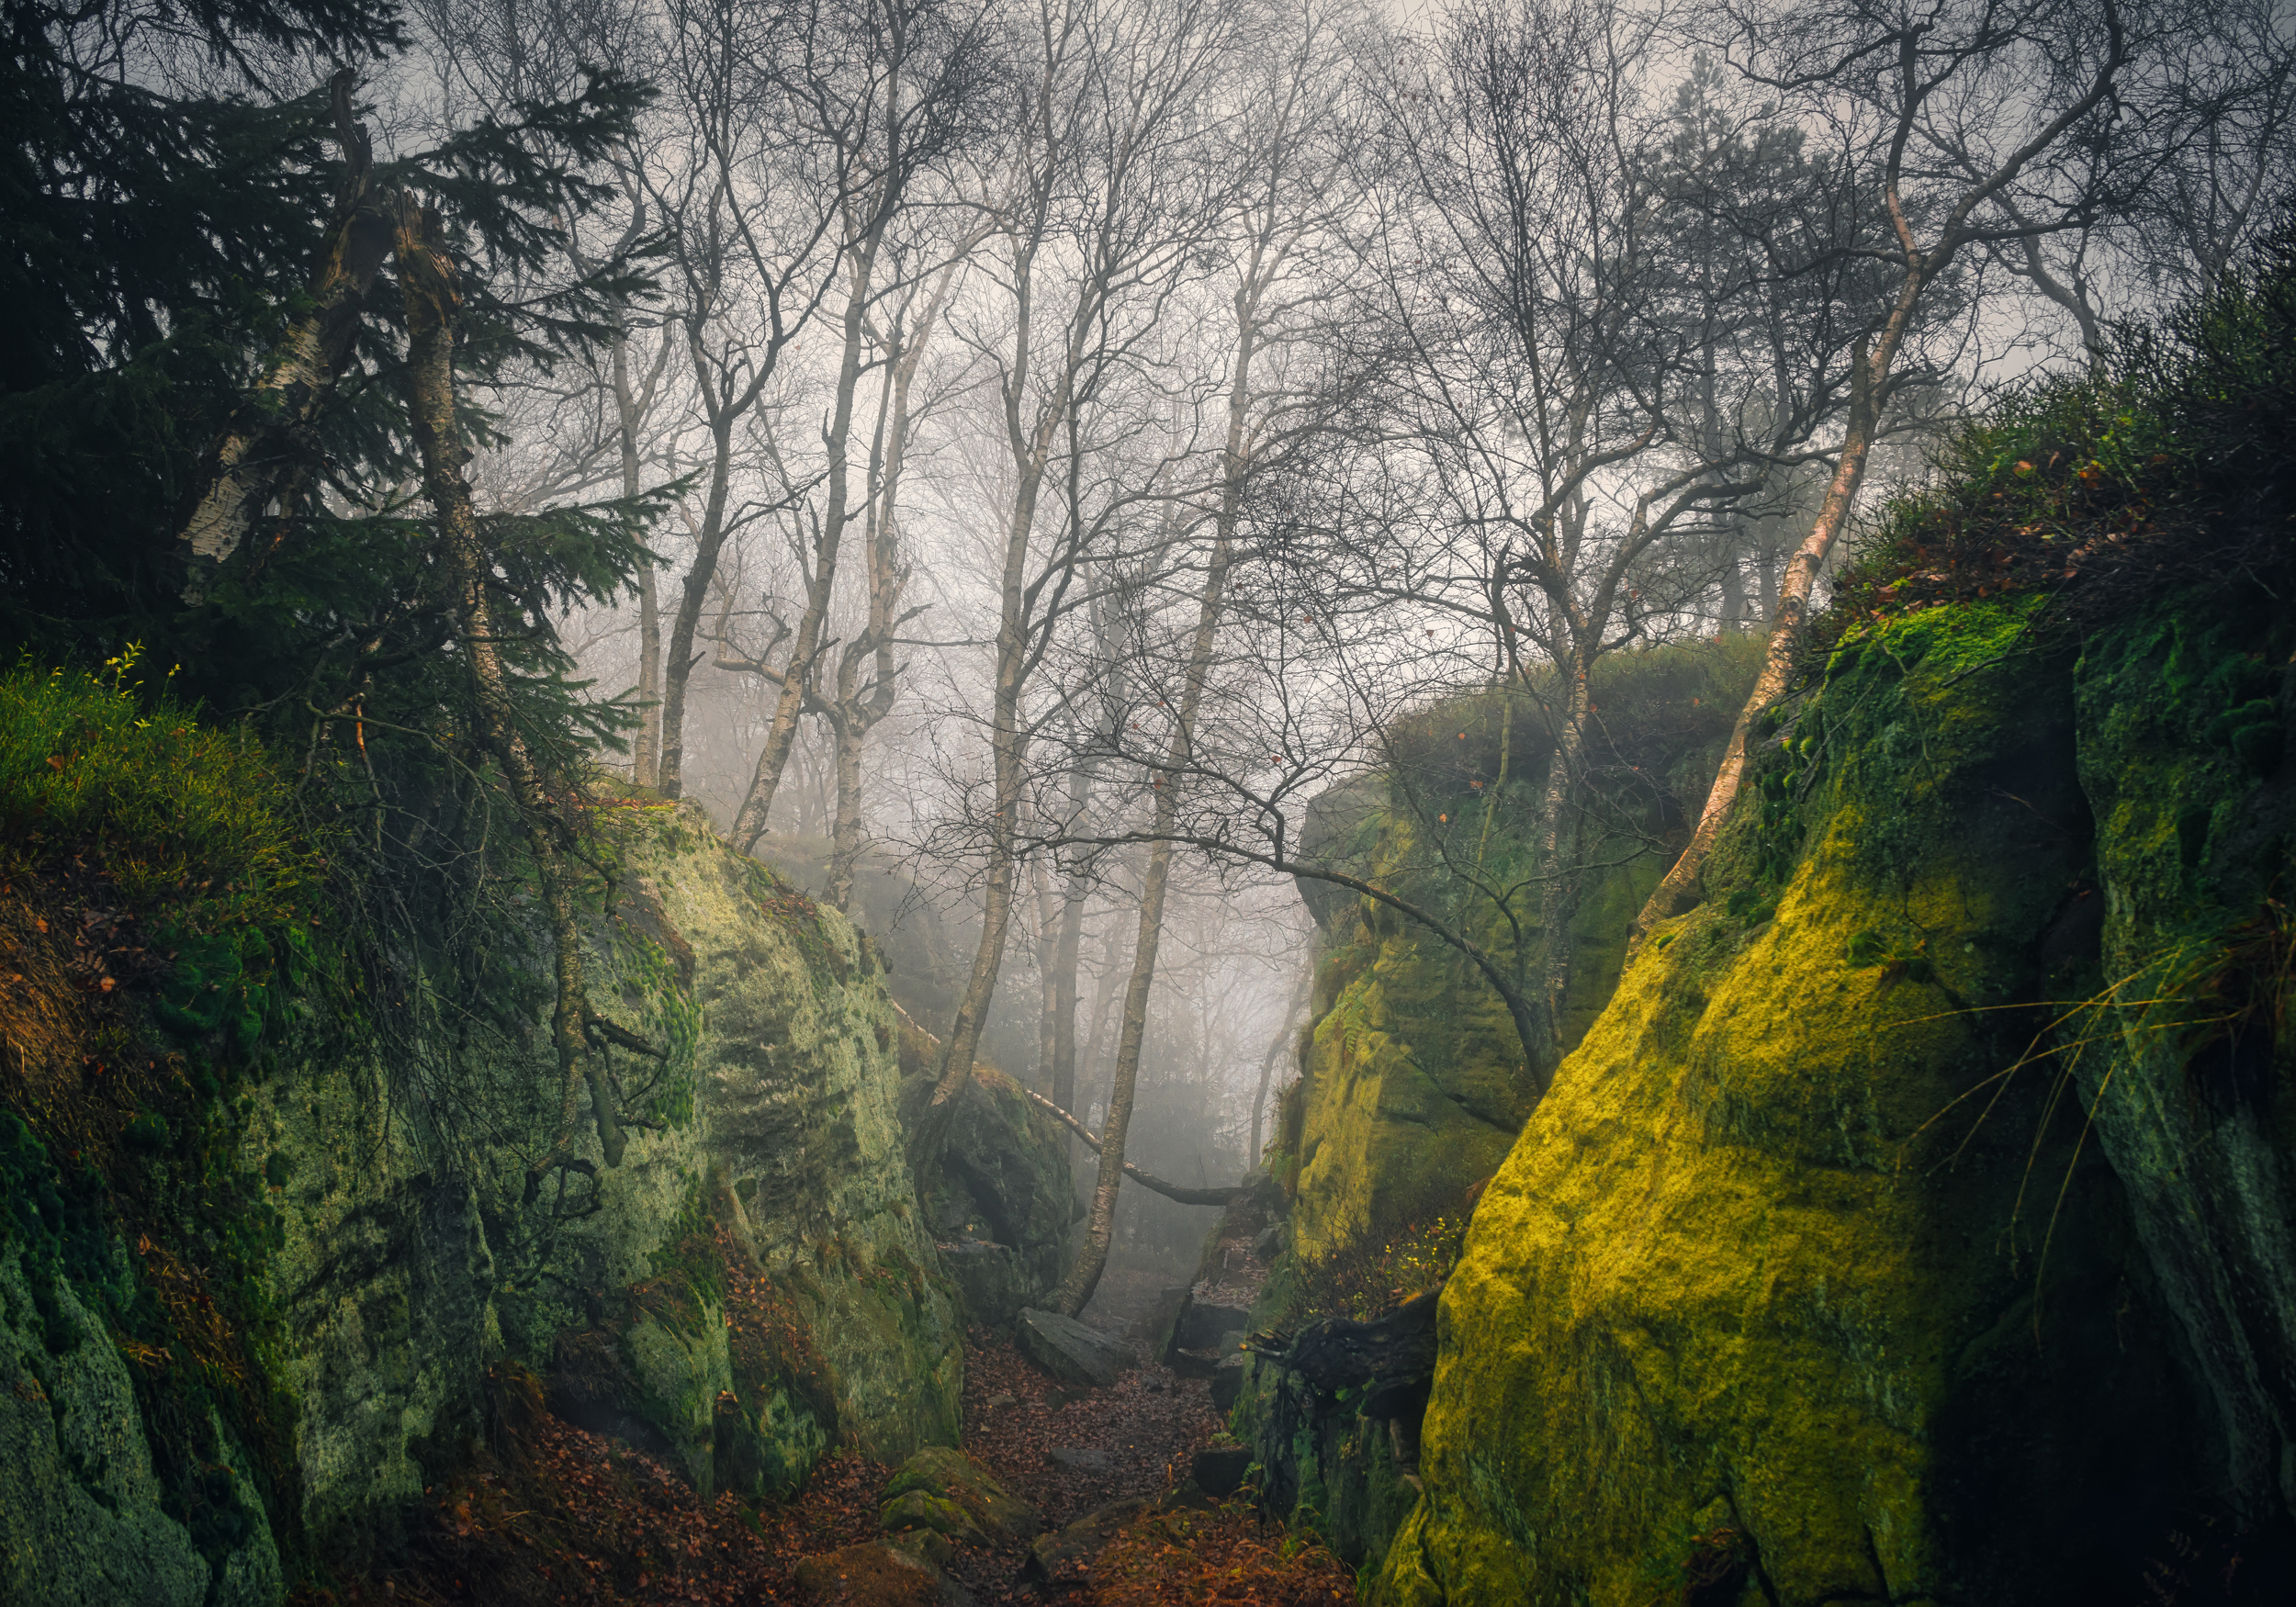 General 2500x1750 rocks trees branch mist forest nature outdoors photography Andrey Ozherelev